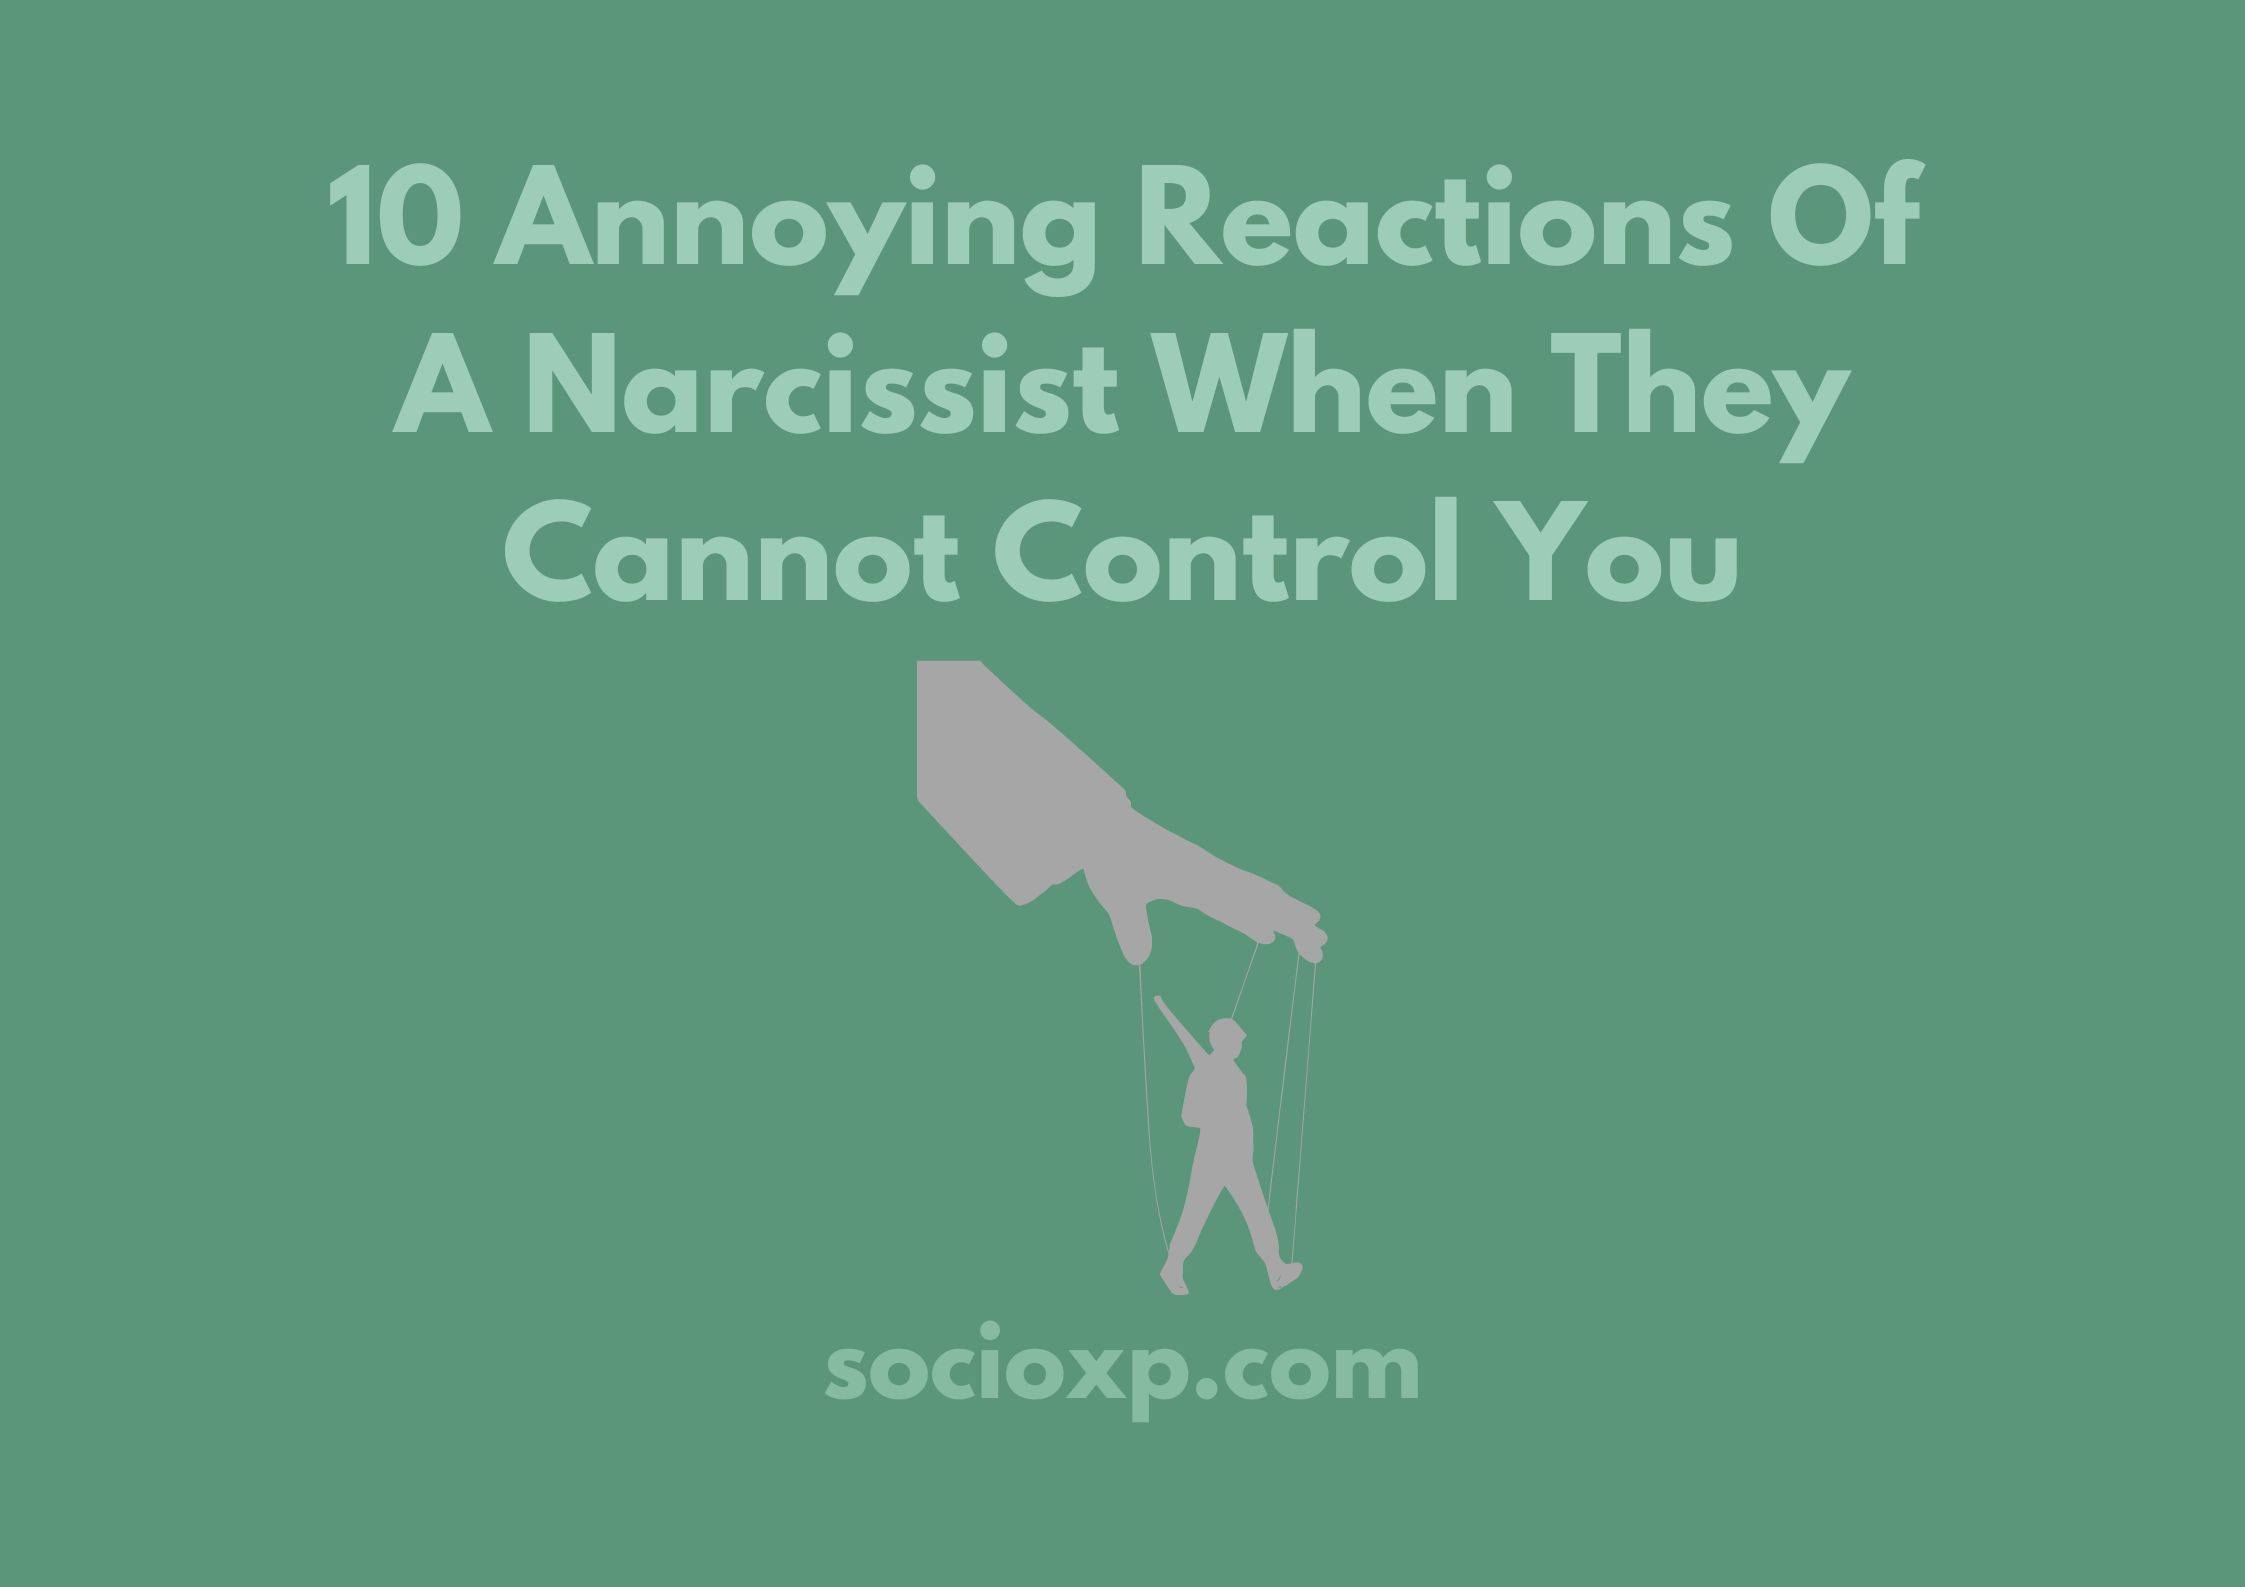 10 Annoying Reactions Of A Narcissist When They Cannot Control You